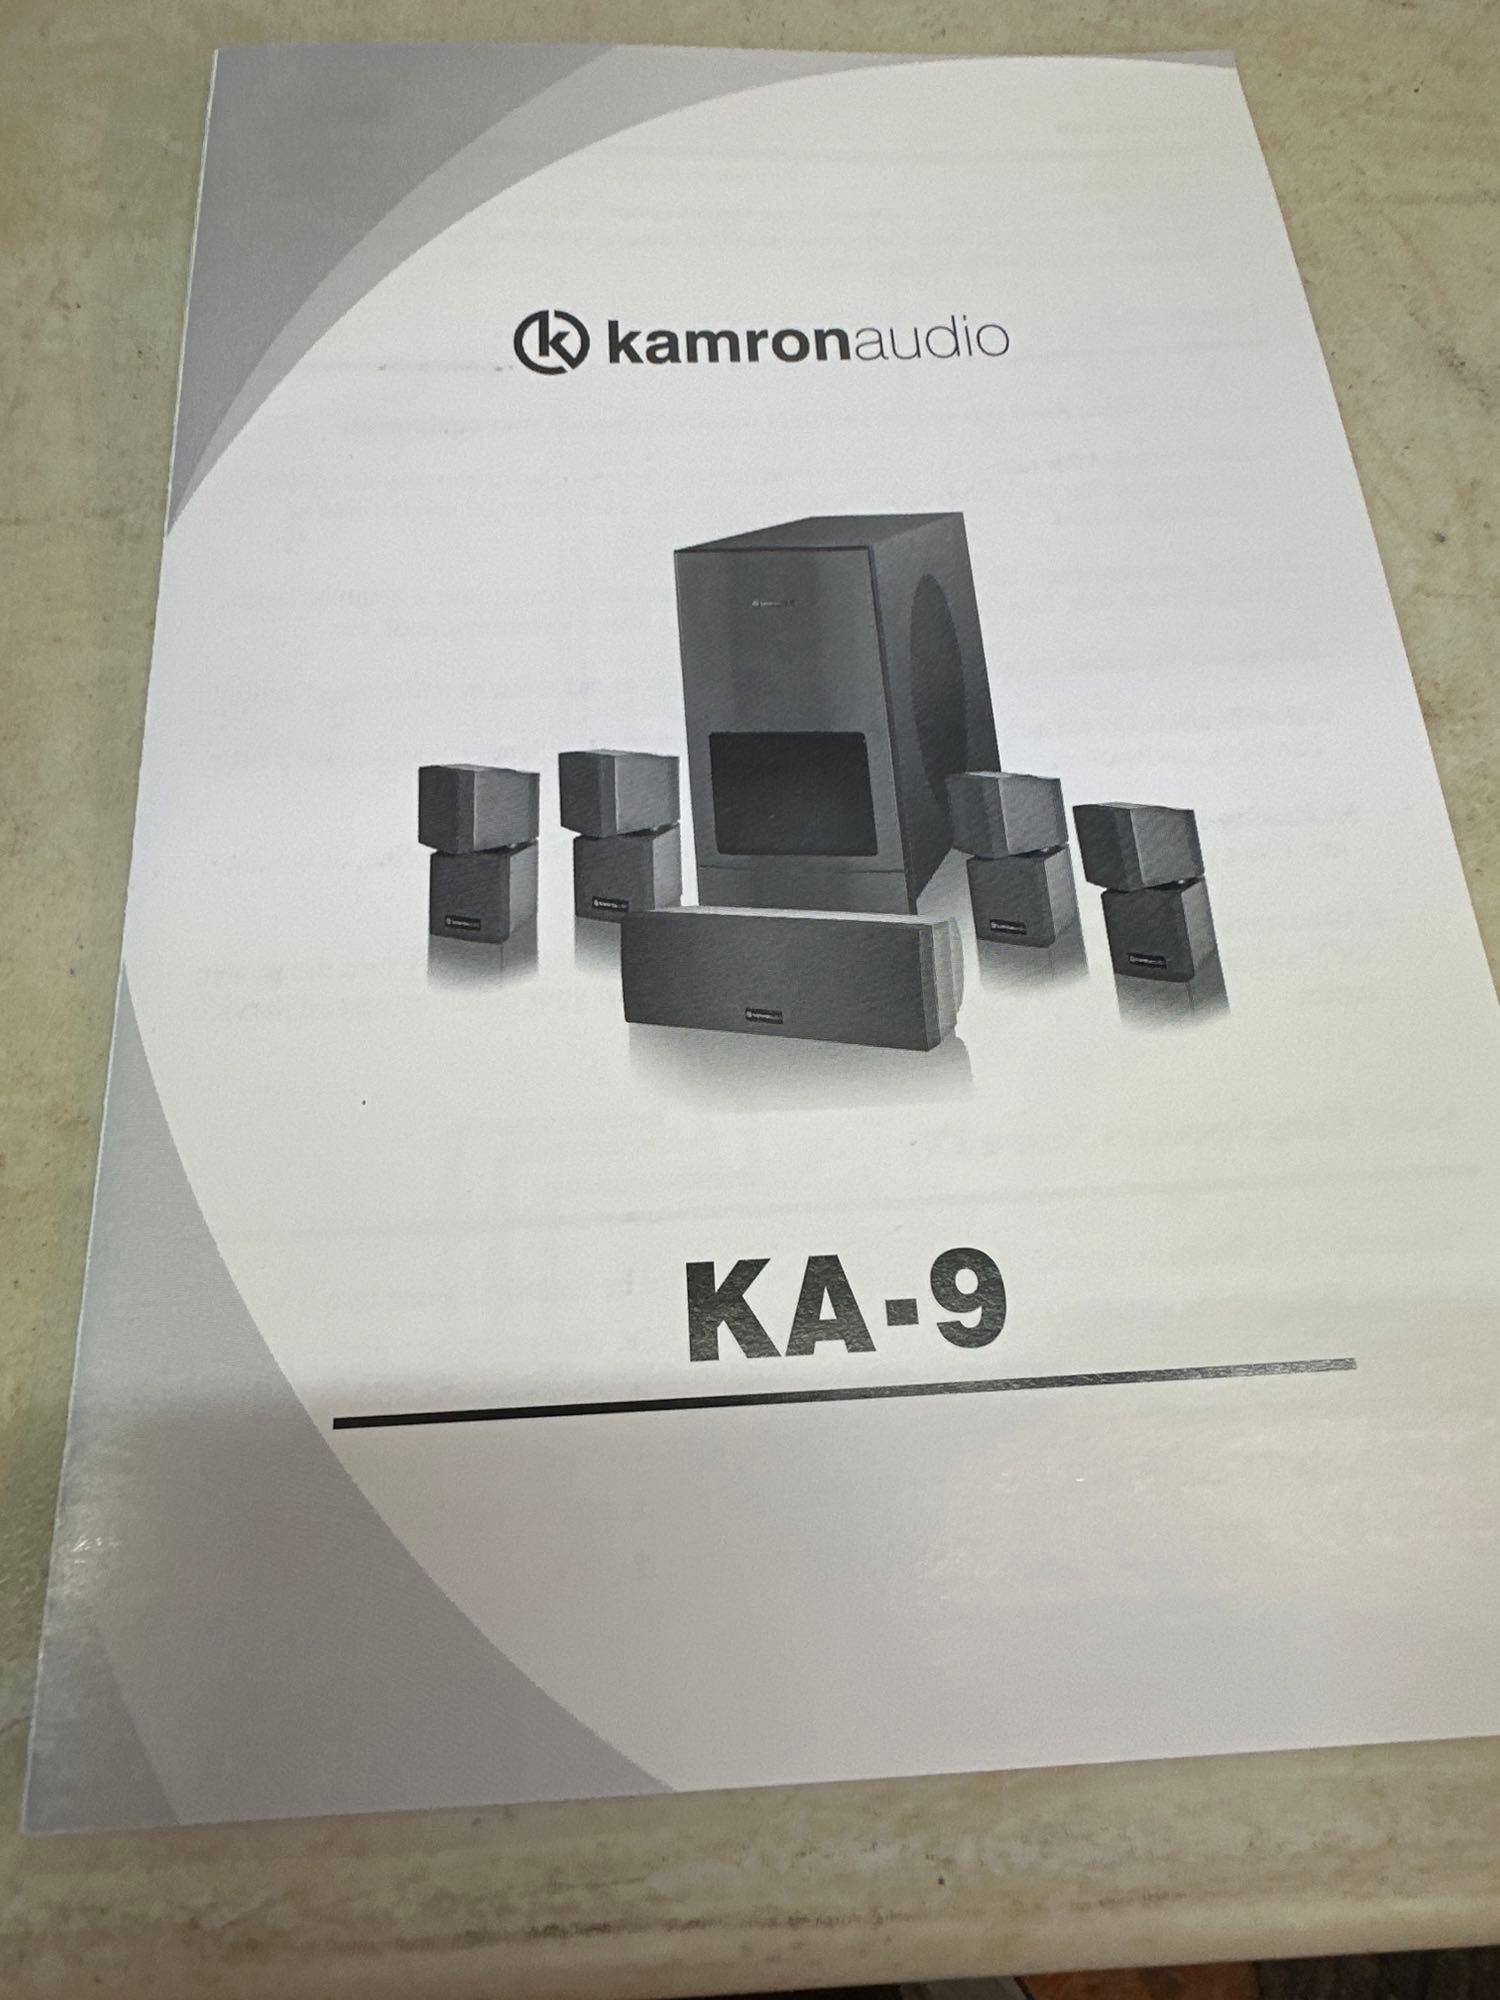 New Kamron Audio 5.1 HD Home Theater System KA-9 In Box